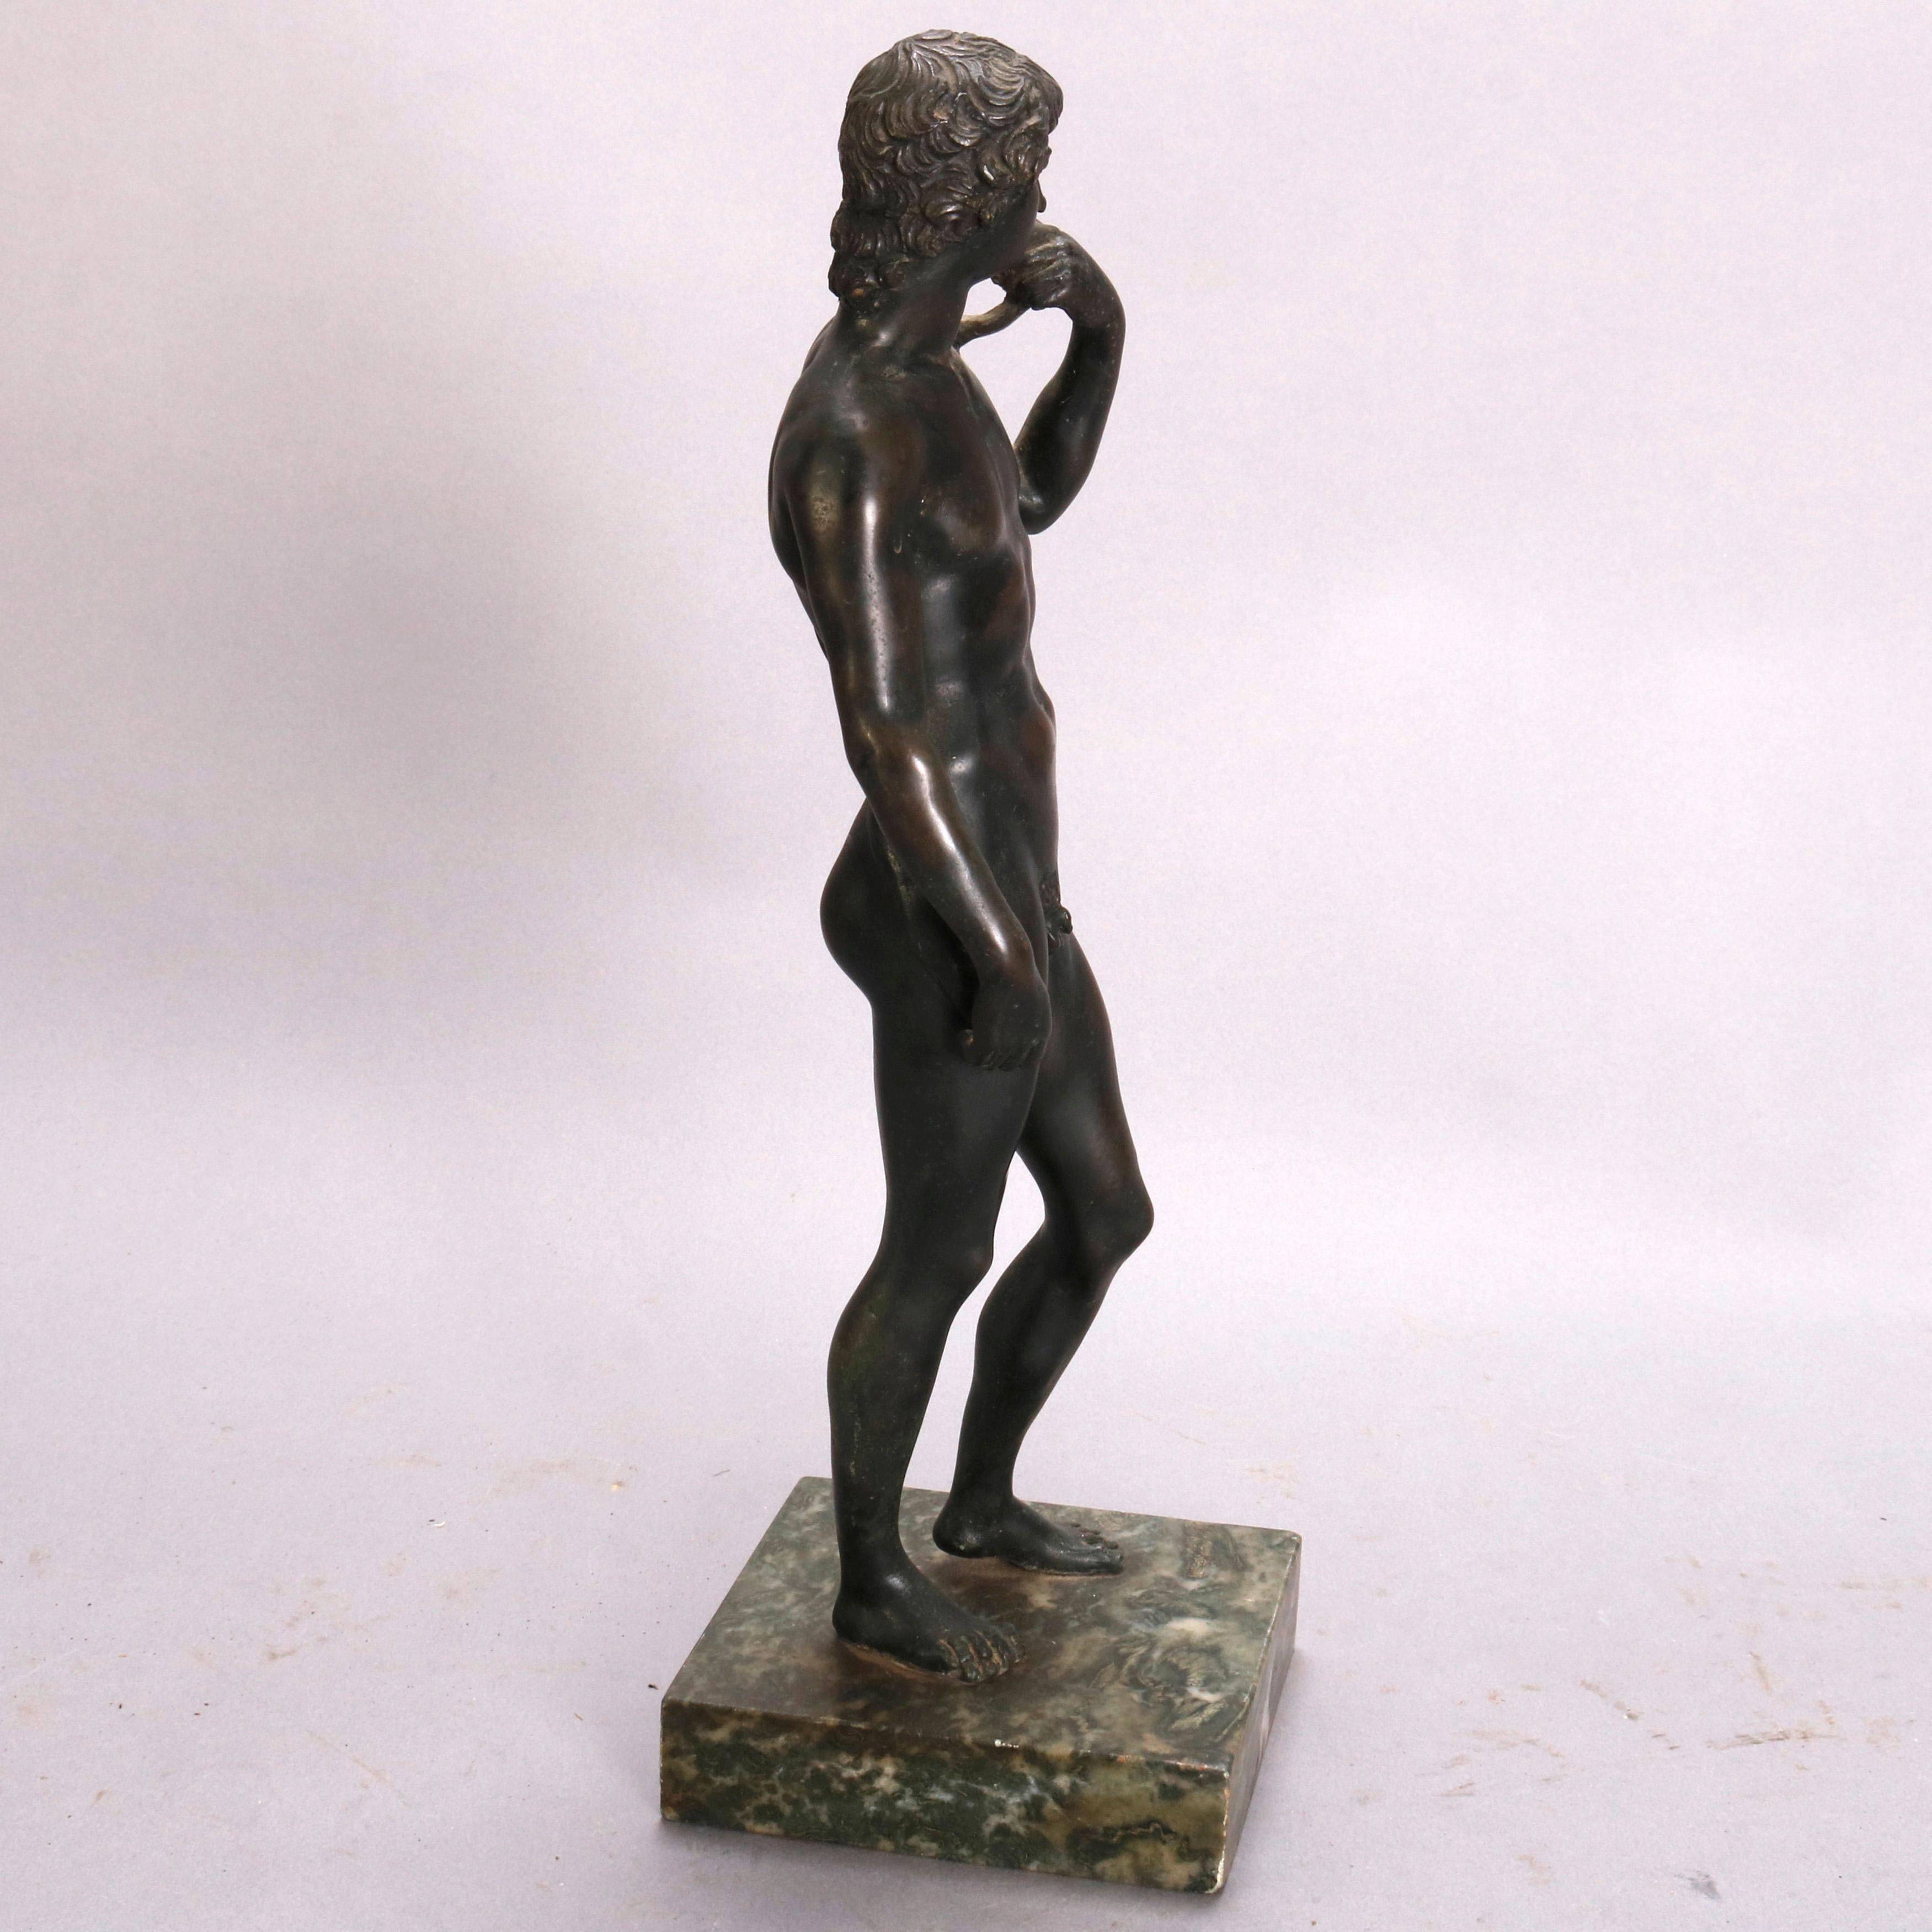 An antique grand tour figural bronze sculpture depicts full length portrait of classical Greek man mounted on marble base, circa 1890

***DELIVERY NOTICE – Due to COVID-19 we have employed LIMITED-TO-NO-CONTACT PRACTICES in the transfer of purchased